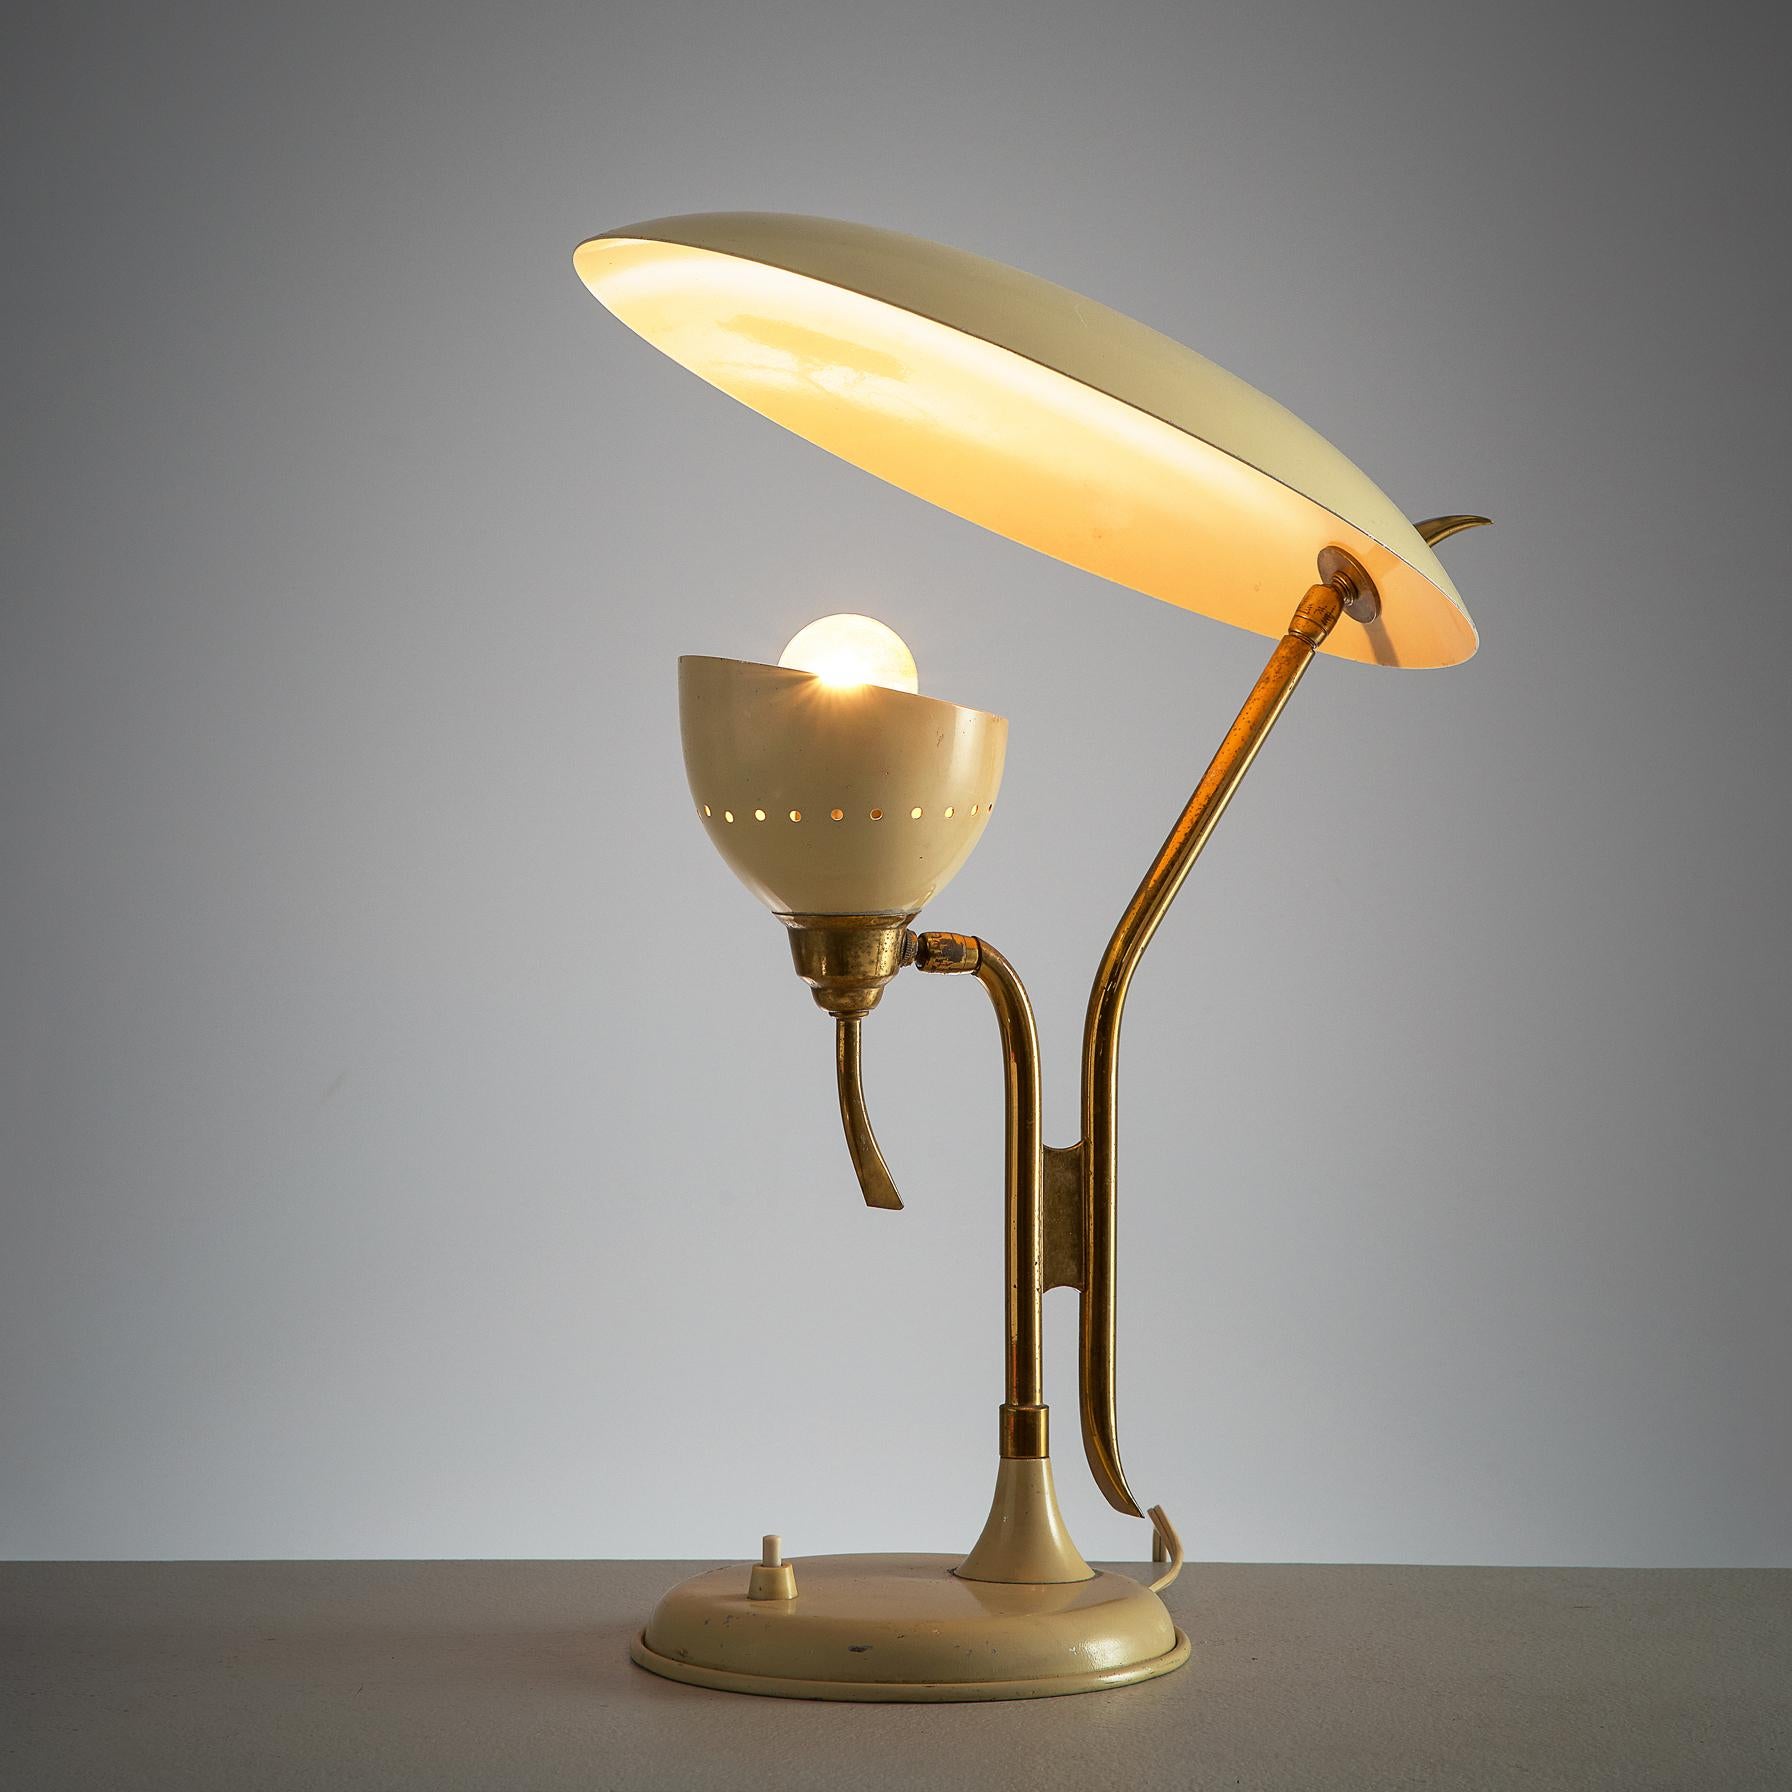 Lumen, table lamp, beige metal and brass, Italy, 1950s.

This 1950s adjustable beige desk light is manufactured by Lumen. The metal shade holding the lamp is directed upwards to another shade. This creates a beautiful diffuse light. Both shades are